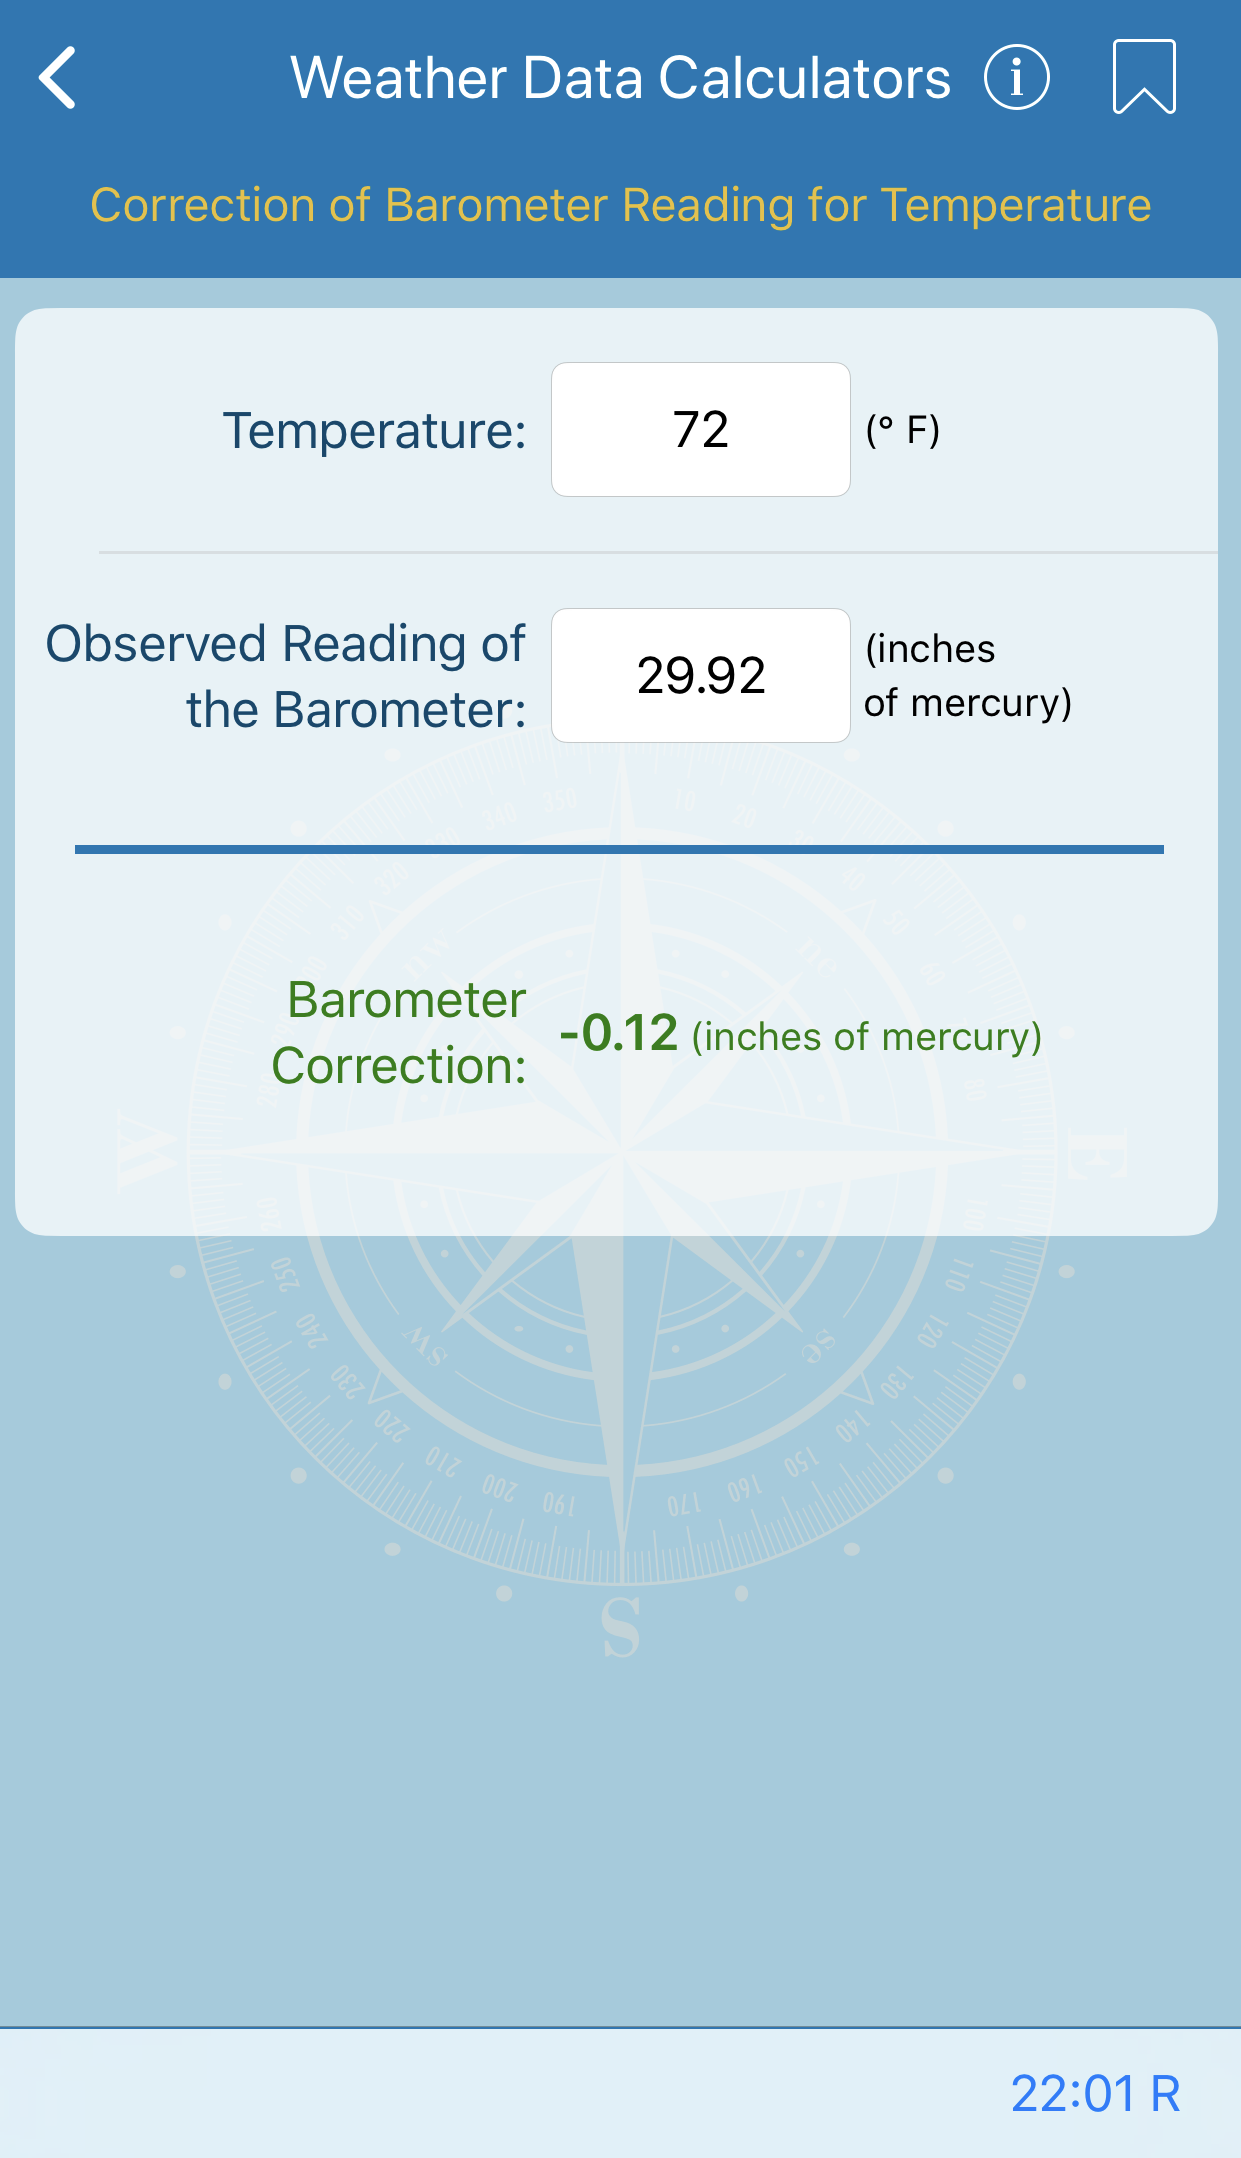 Correction of Barometer Reading for Temperature